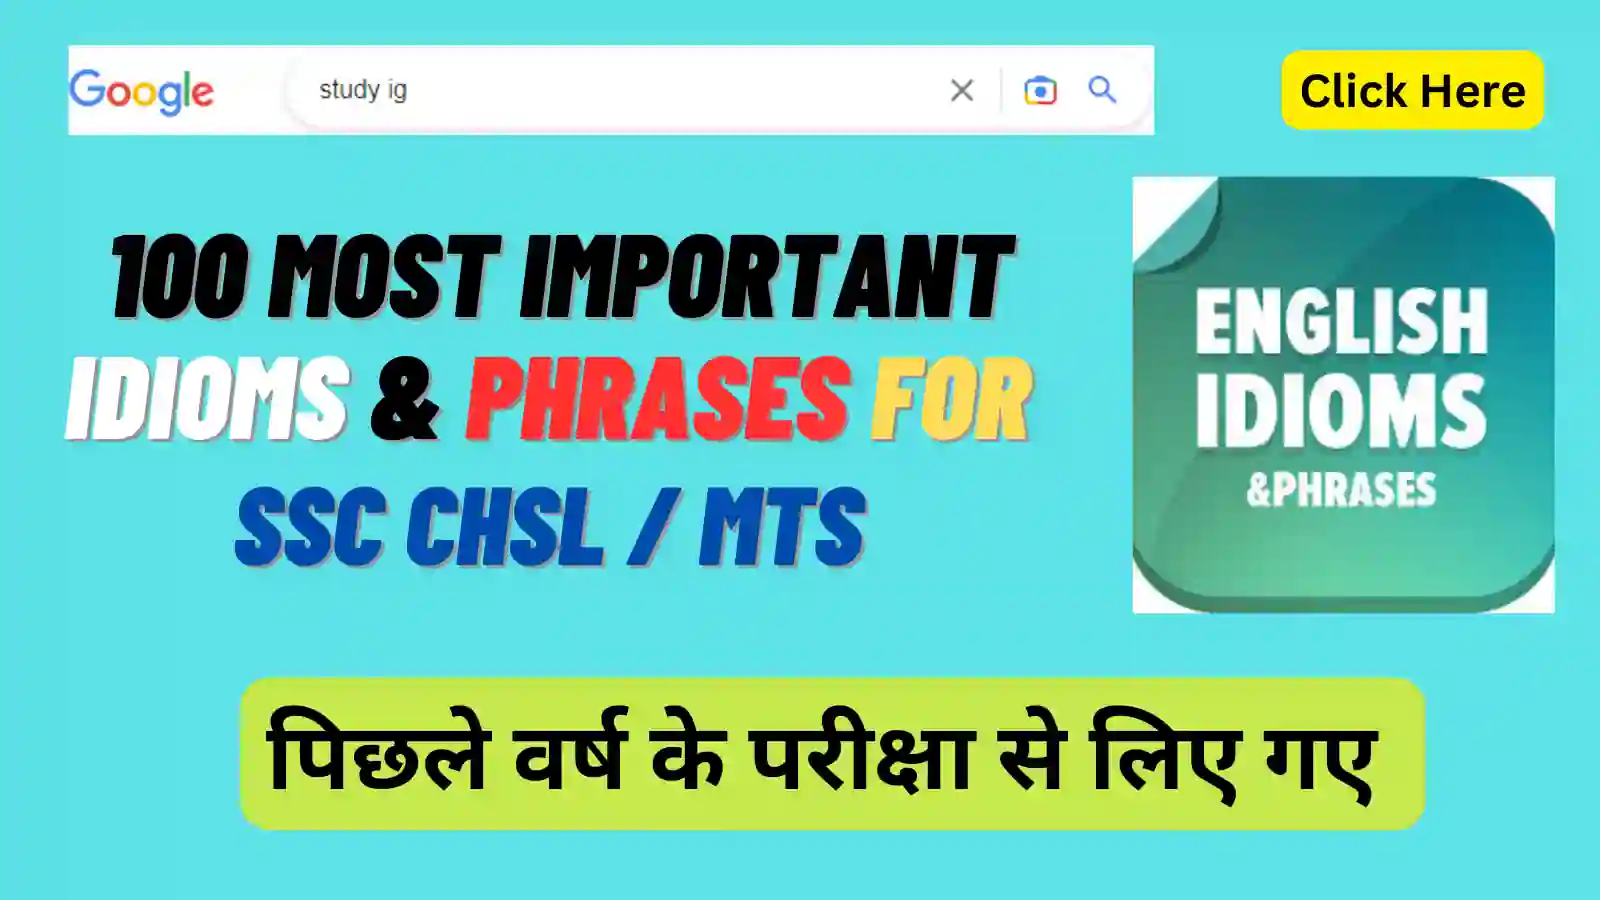 Most Important IDIOMS & PHRASES For SSC CHSL / SSC MTS